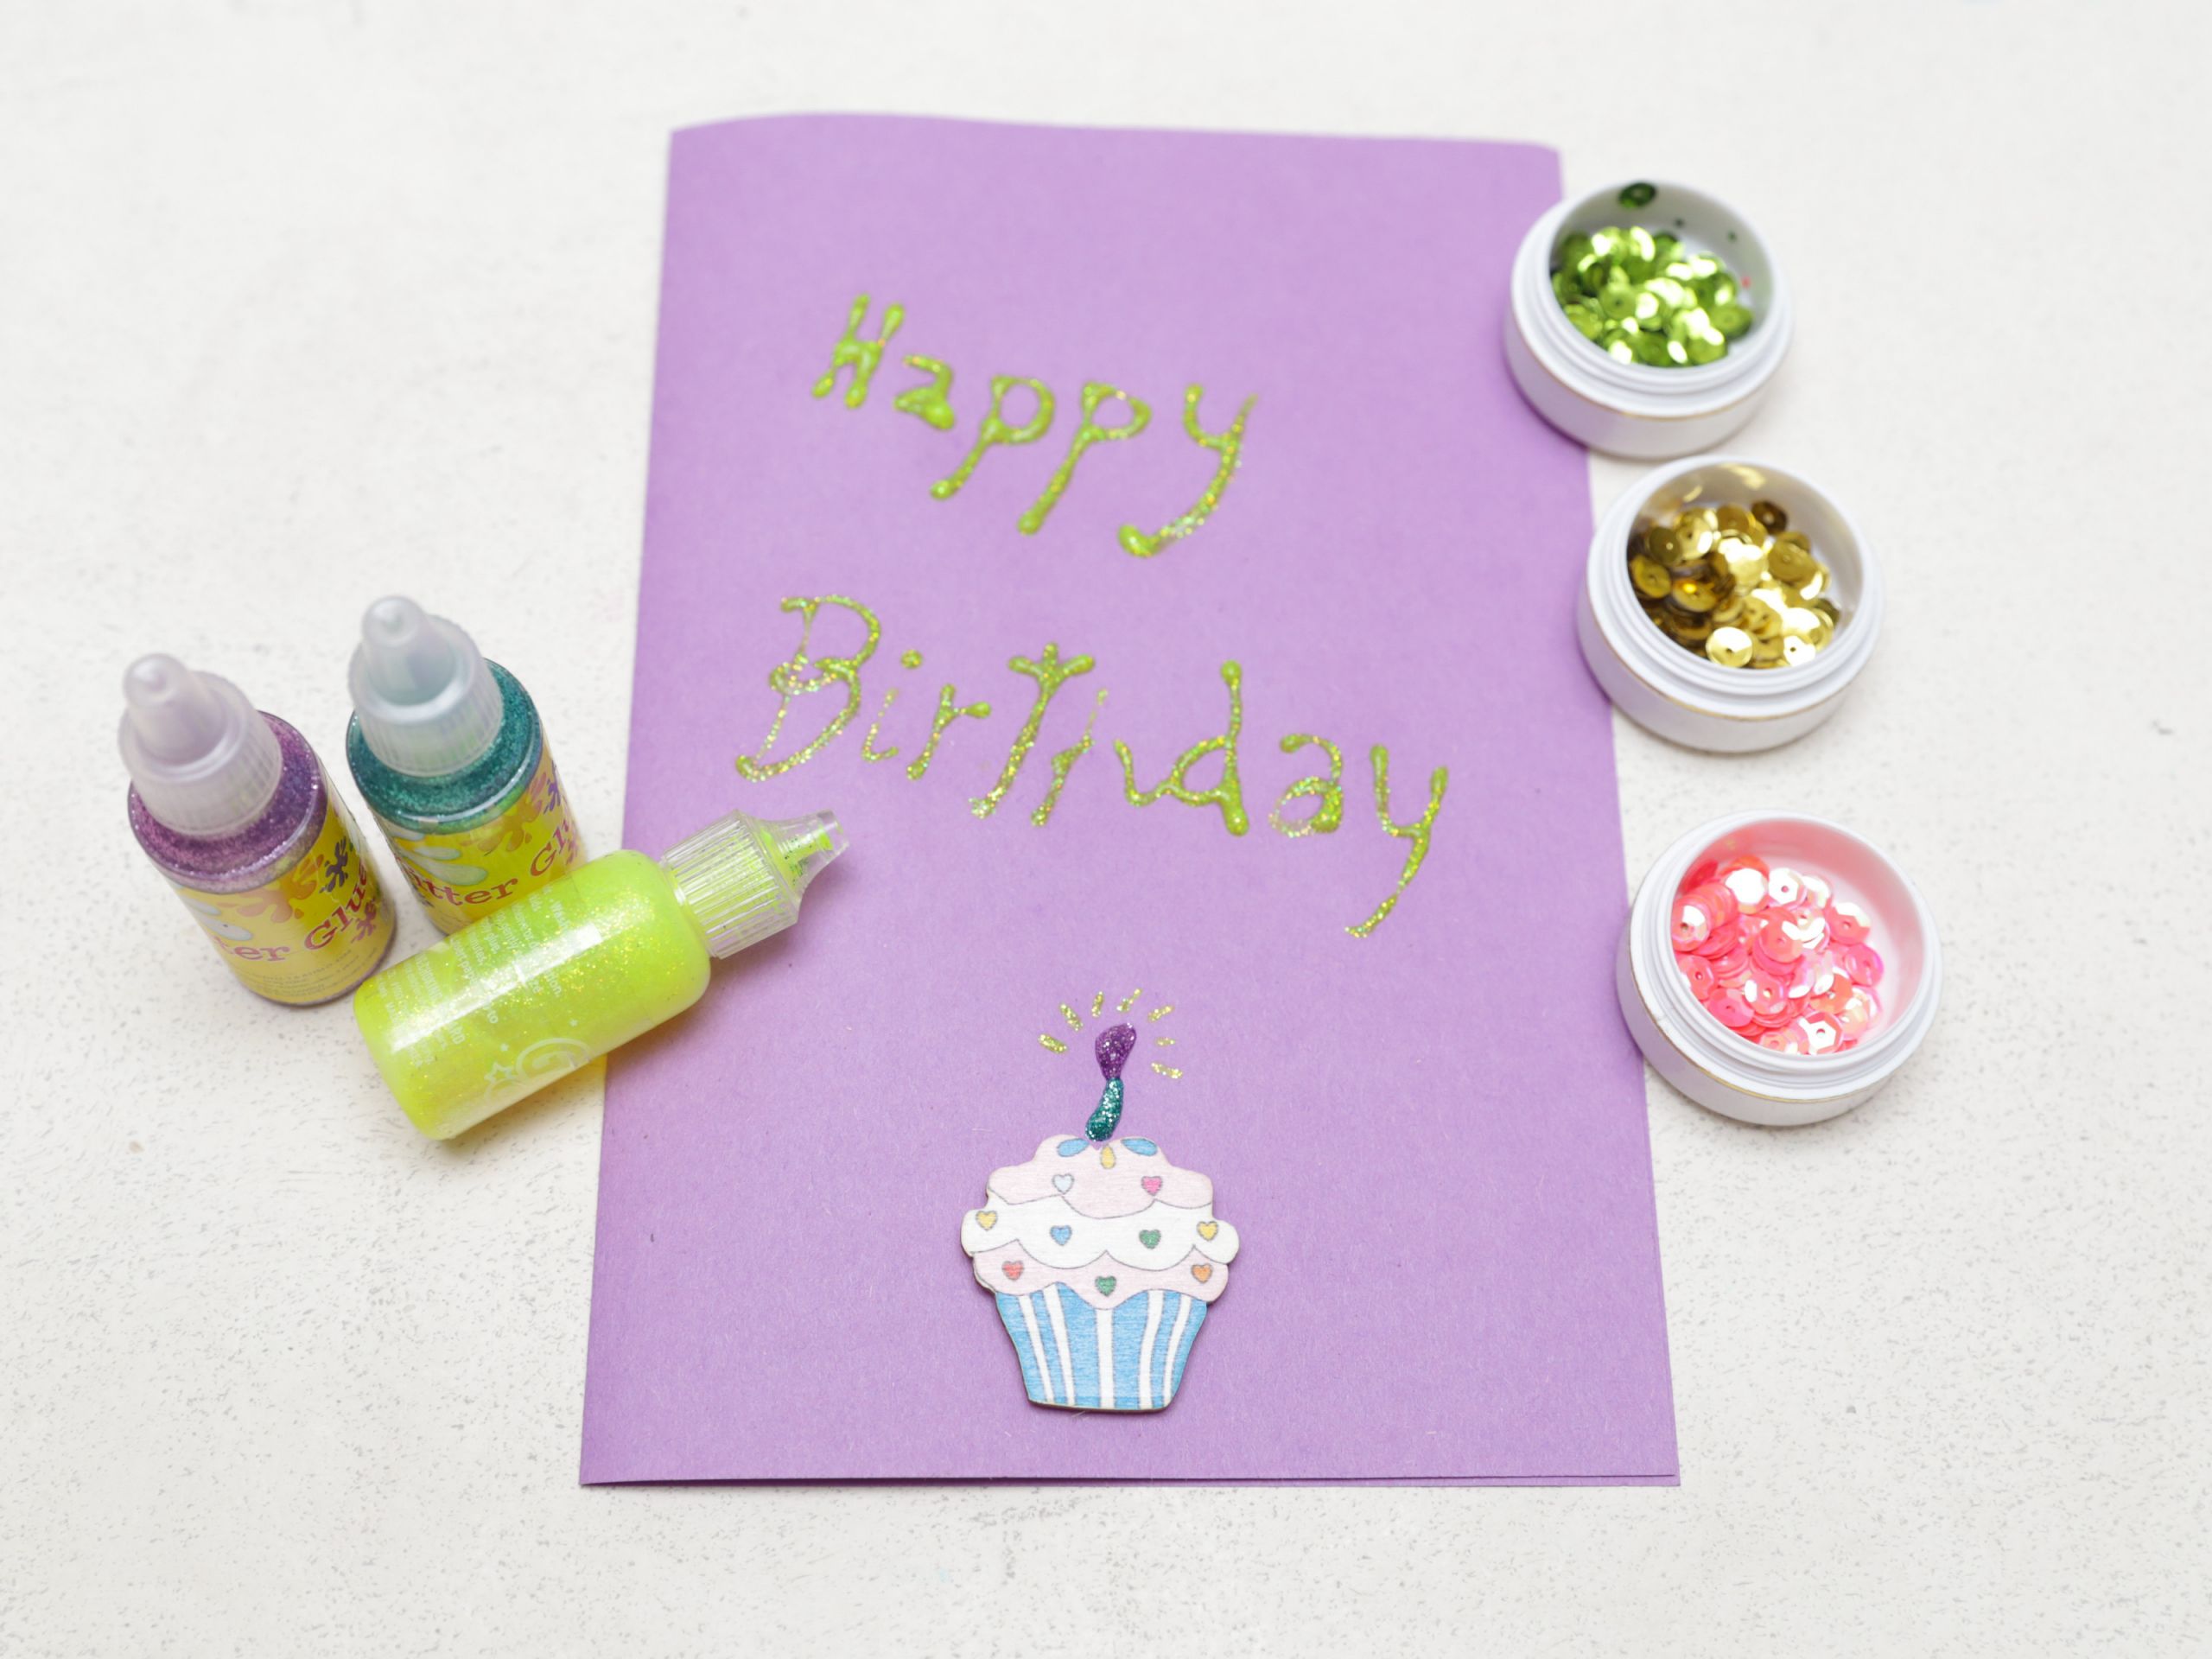 Making Birthday Cards
 How to Make a Simple Handmade Birthday Card 15 Steps